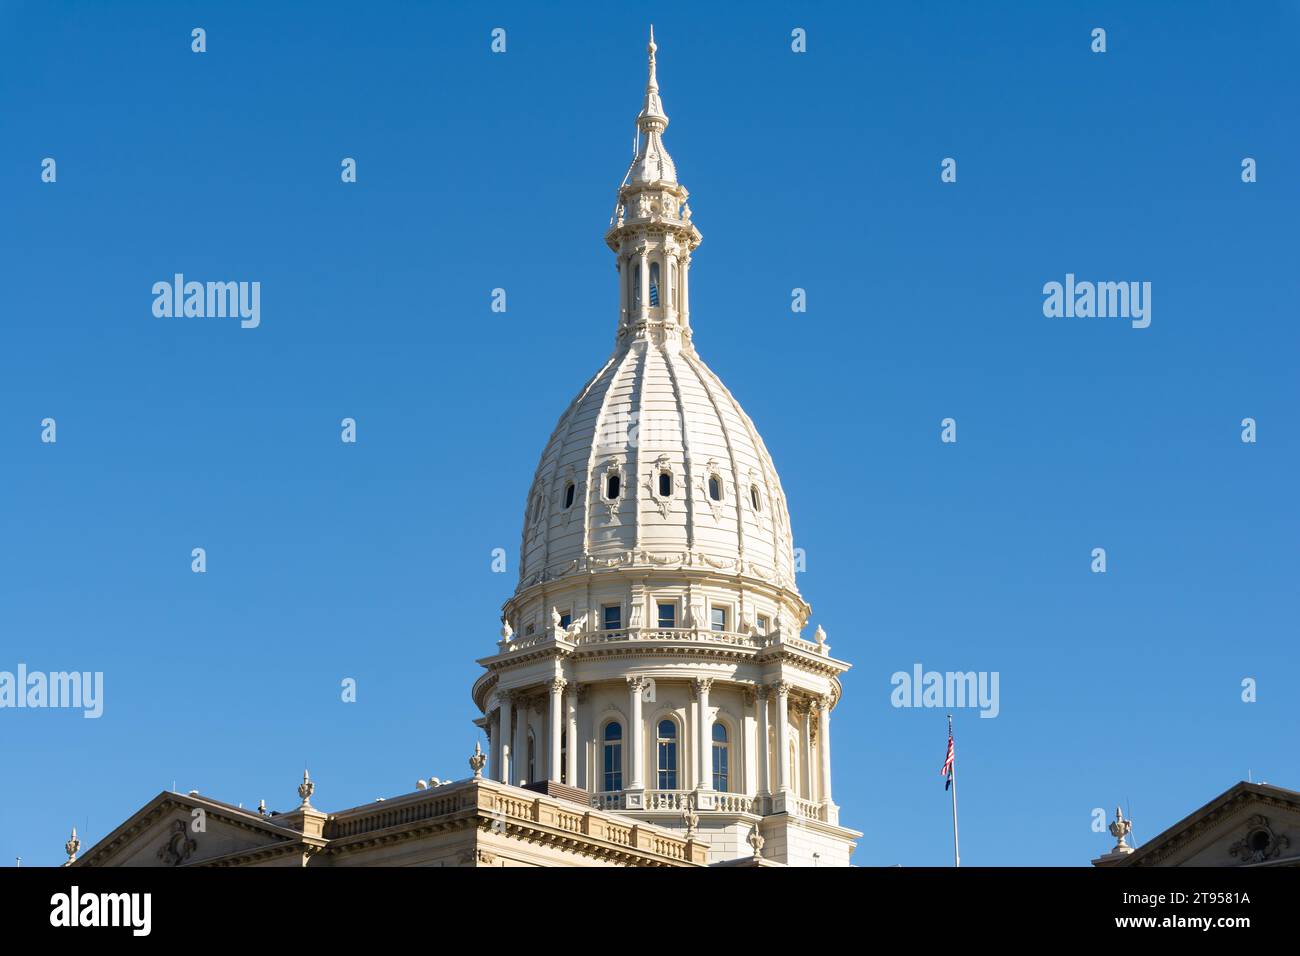 Exterior of the Michigan State Capitol Building, built in 1872 to 1878, in Lansing, Michigan, USA. Stock Photo